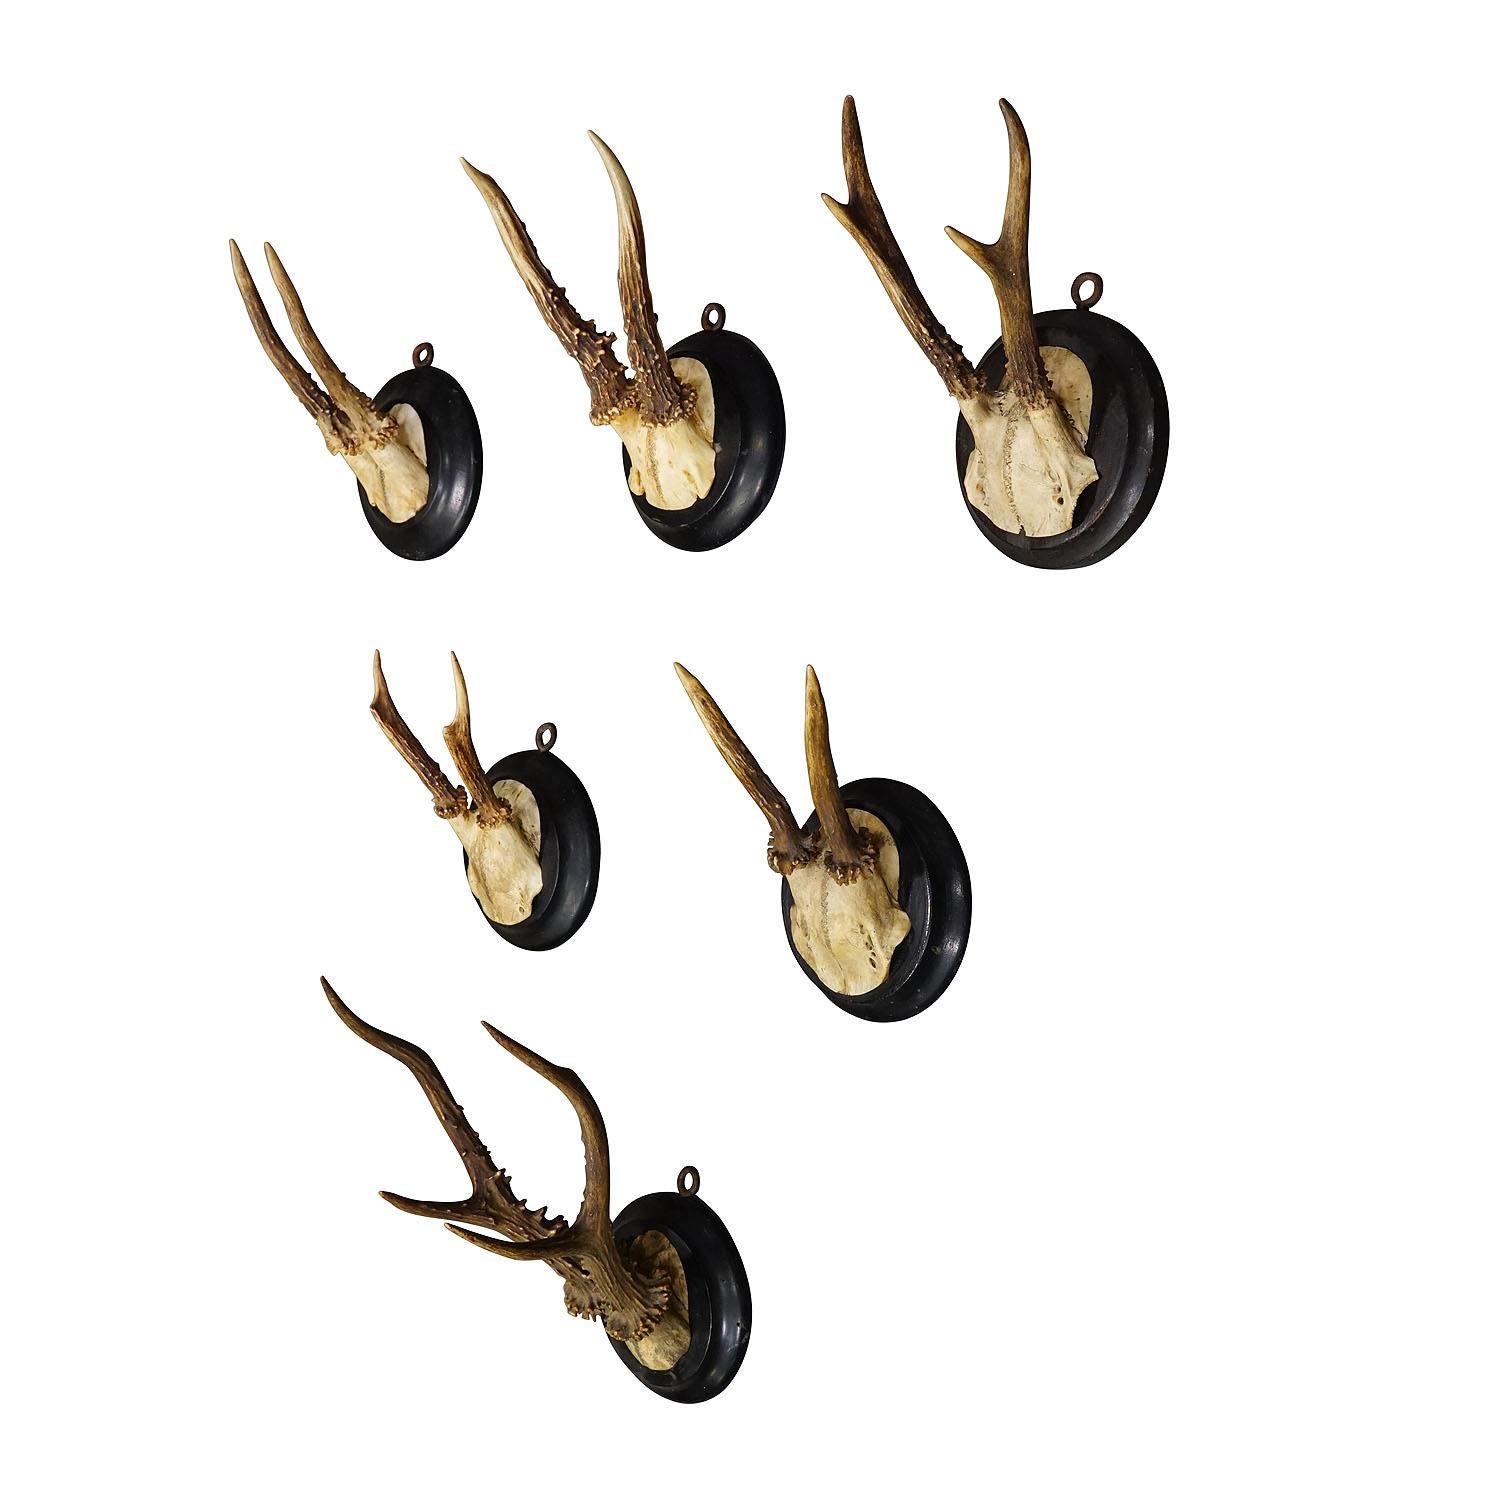 Six Antique deer trophies on wooden plaques Germany ca. 1940s

A set of six antique Black Forest deer trophies on turned wooden plaques with black finish. Some with handwritten inscription on the back of the plaque featuring place and date of the